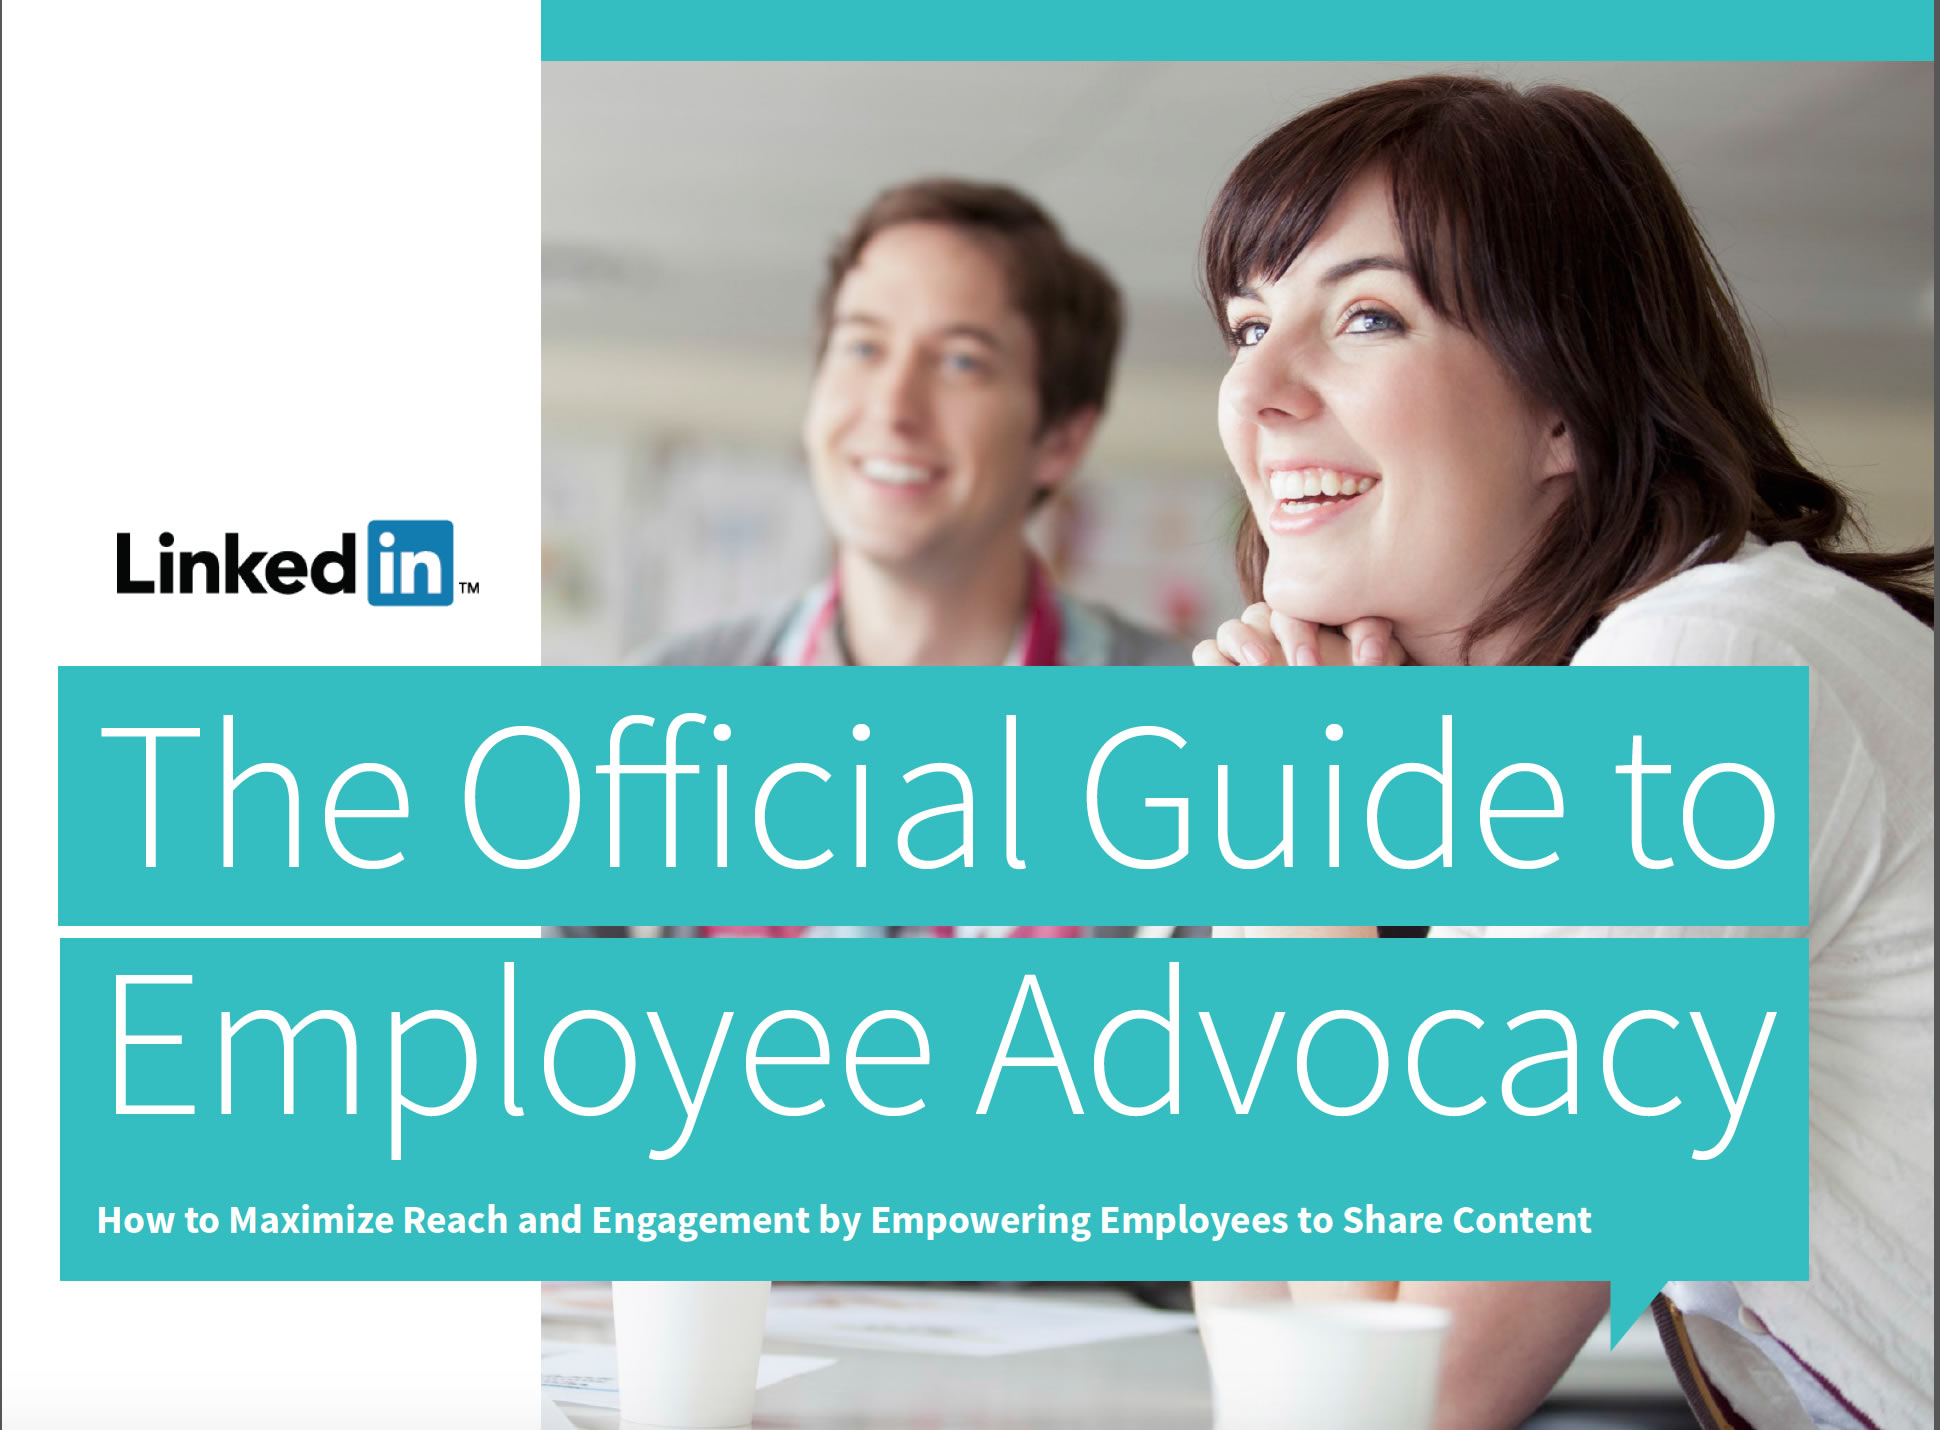 linkedin-elevate-official-guide-employee-advocacy-cheryl-burgess